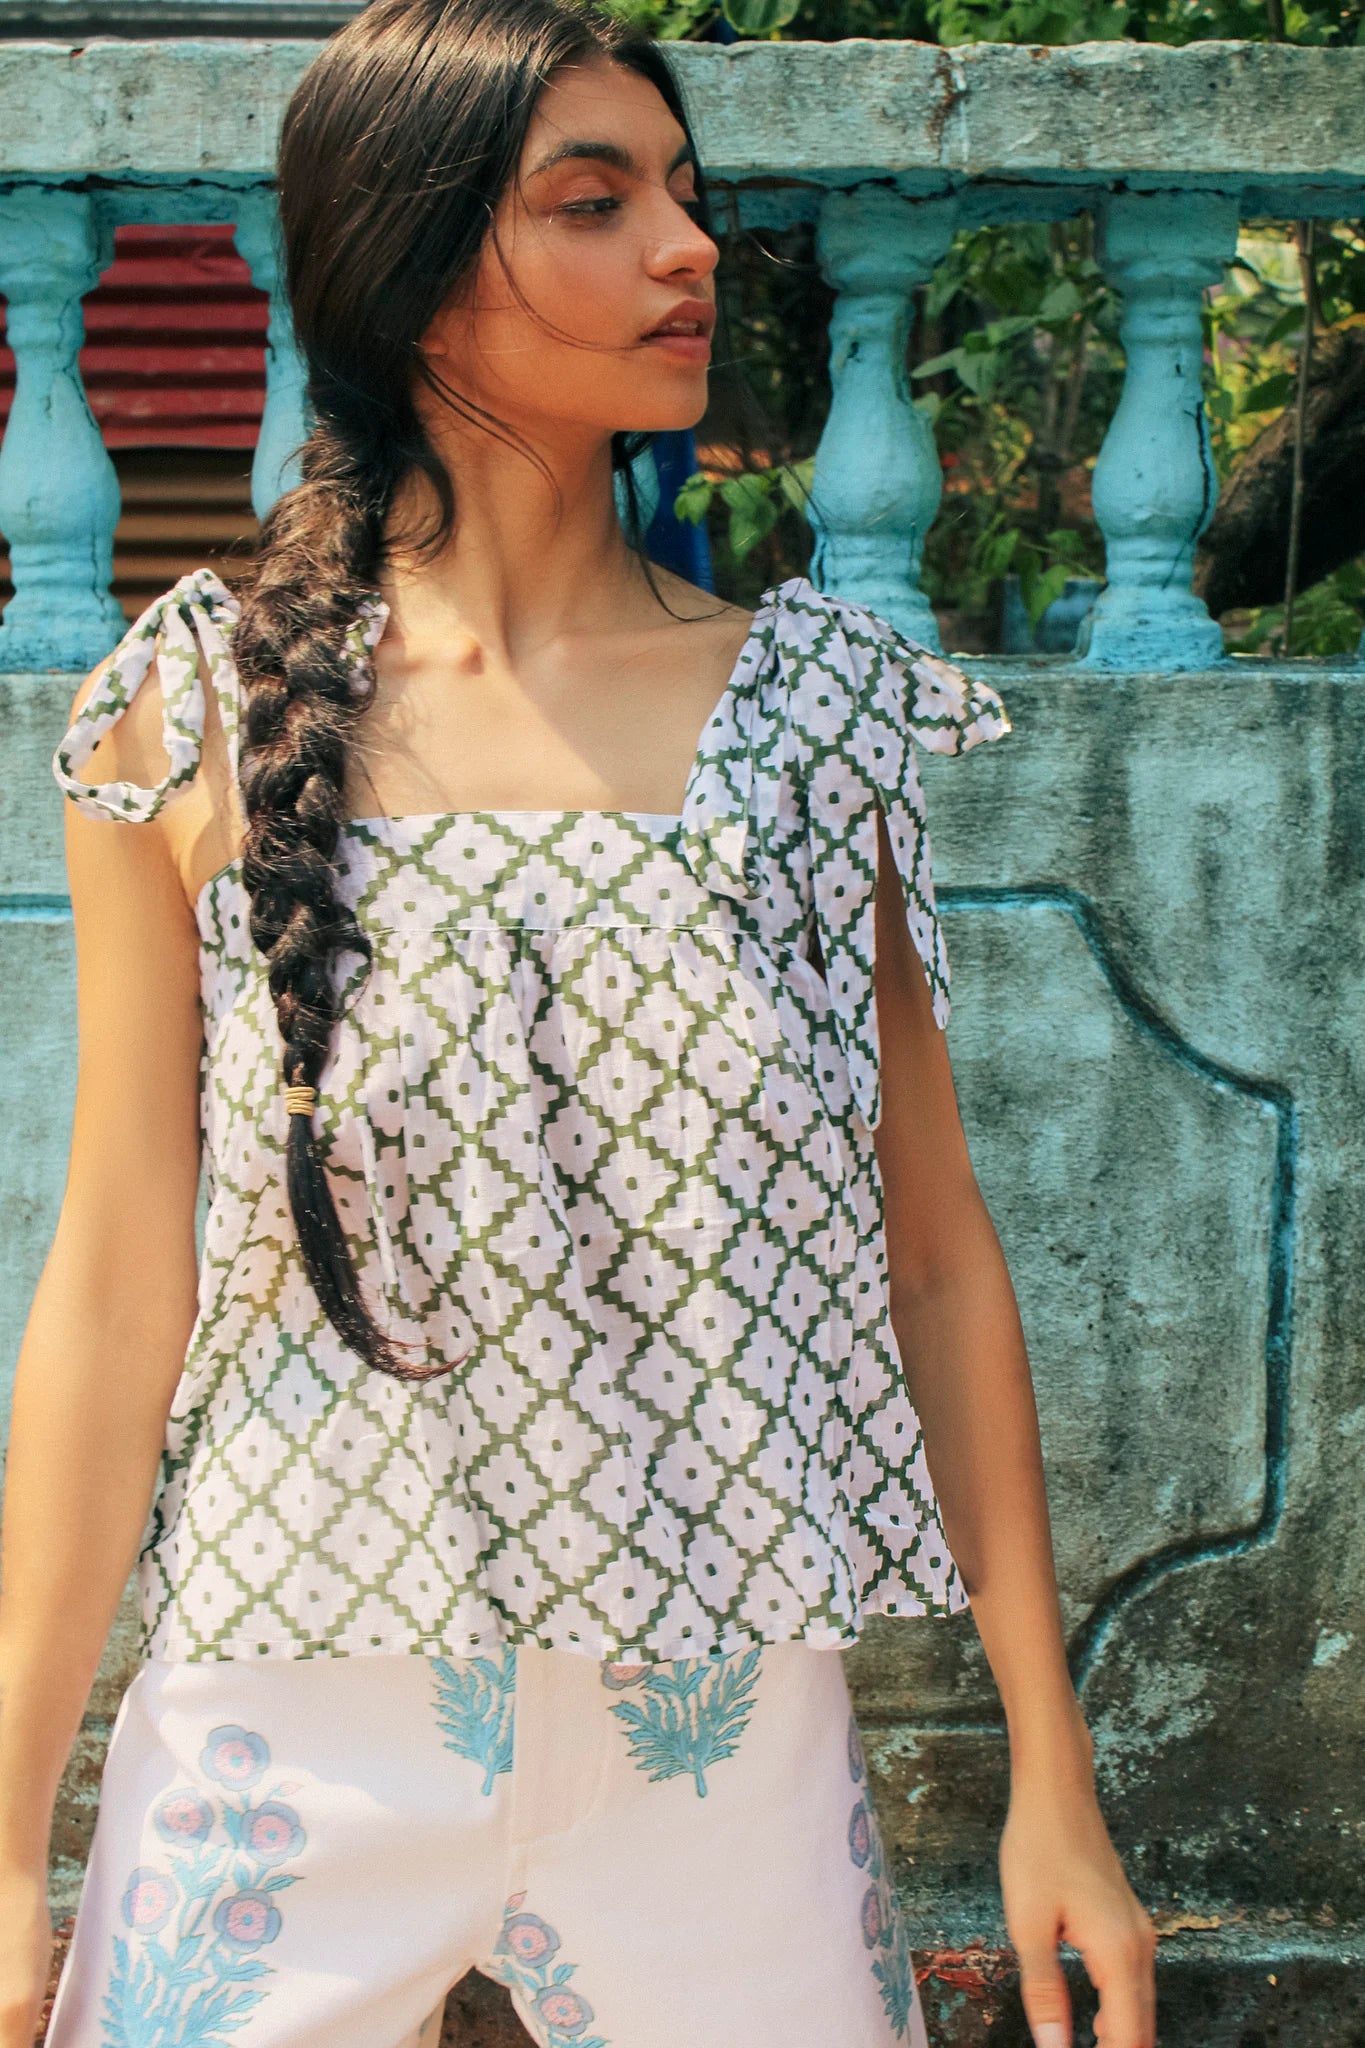 A woman with a long braid stands in front of a weathered blue wall, wearing the Emma Top - Oasis Green by SZ Blockprints and light-colored pants adorned with floral designs.